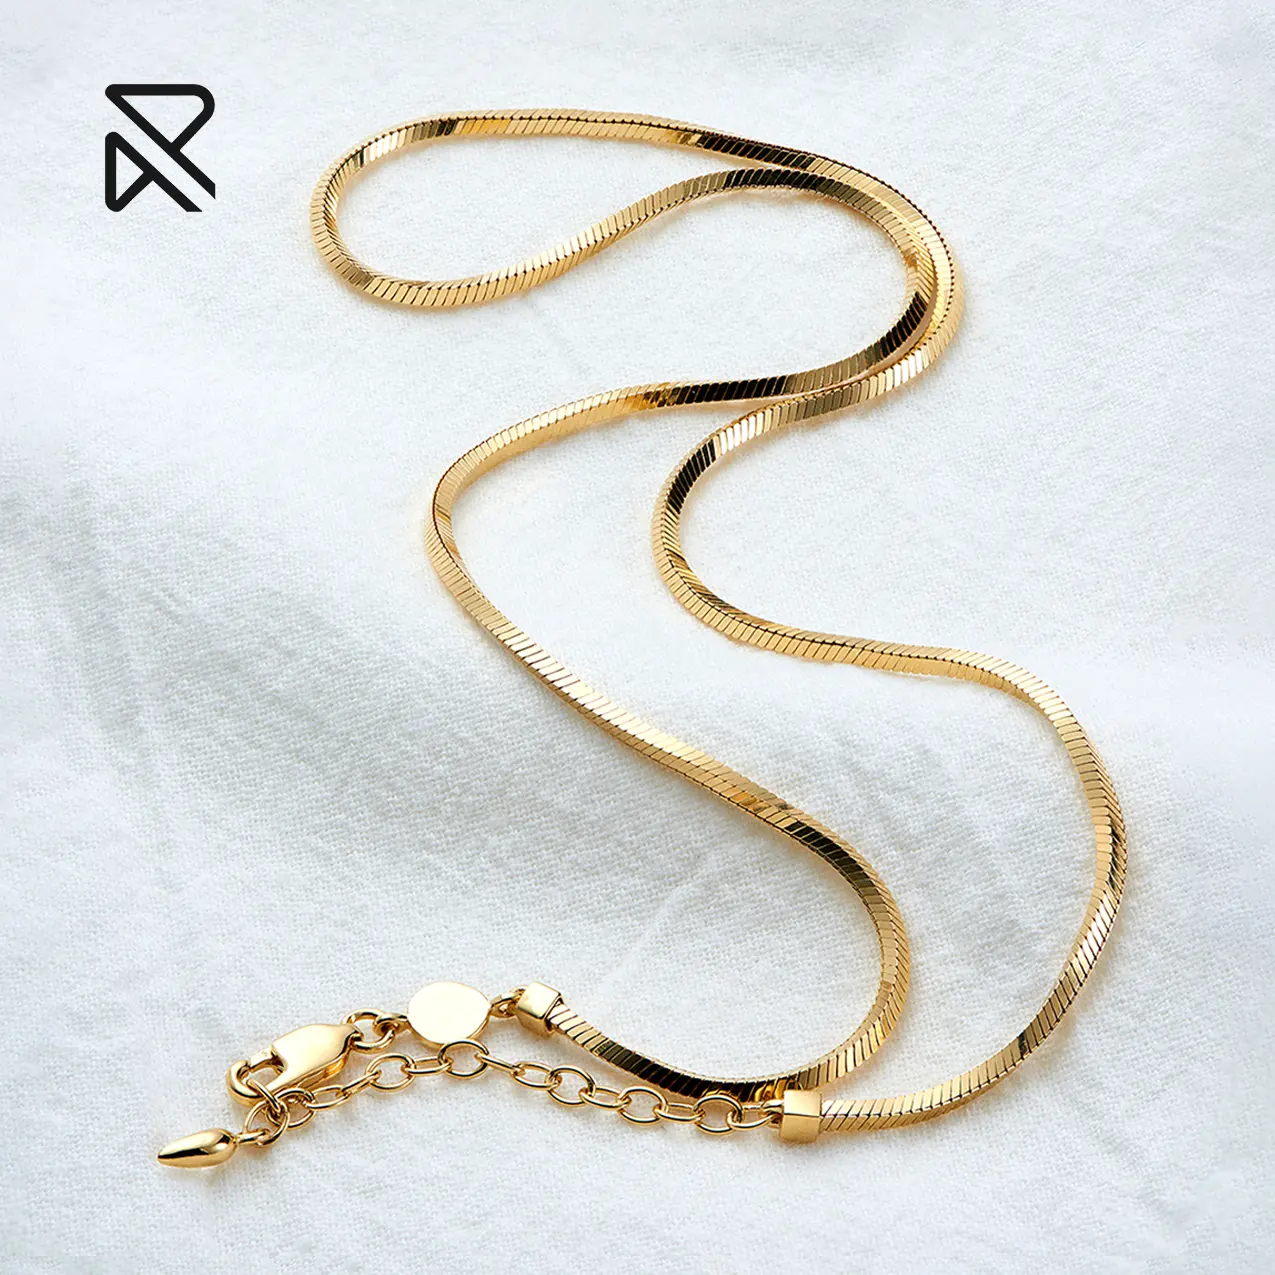 2022 Rochime fashion Simple Snake Bone Necklace Jewelry 18k Gold Plated Chain Wedding Necklaces